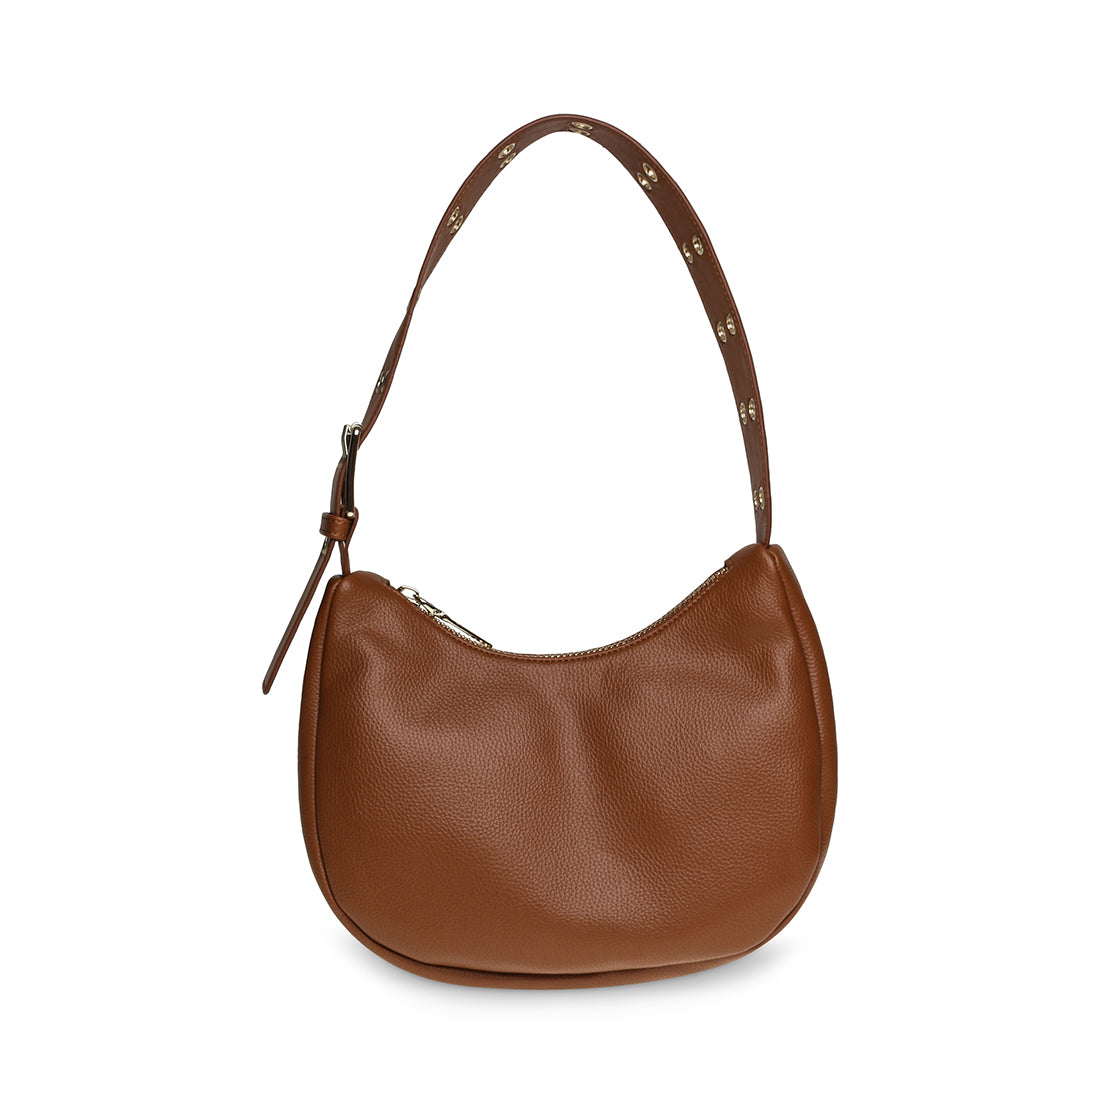 ROSS DRESS FOR LESS Women's HANDBAGS CLEARANCE BAGS FOR LADIES